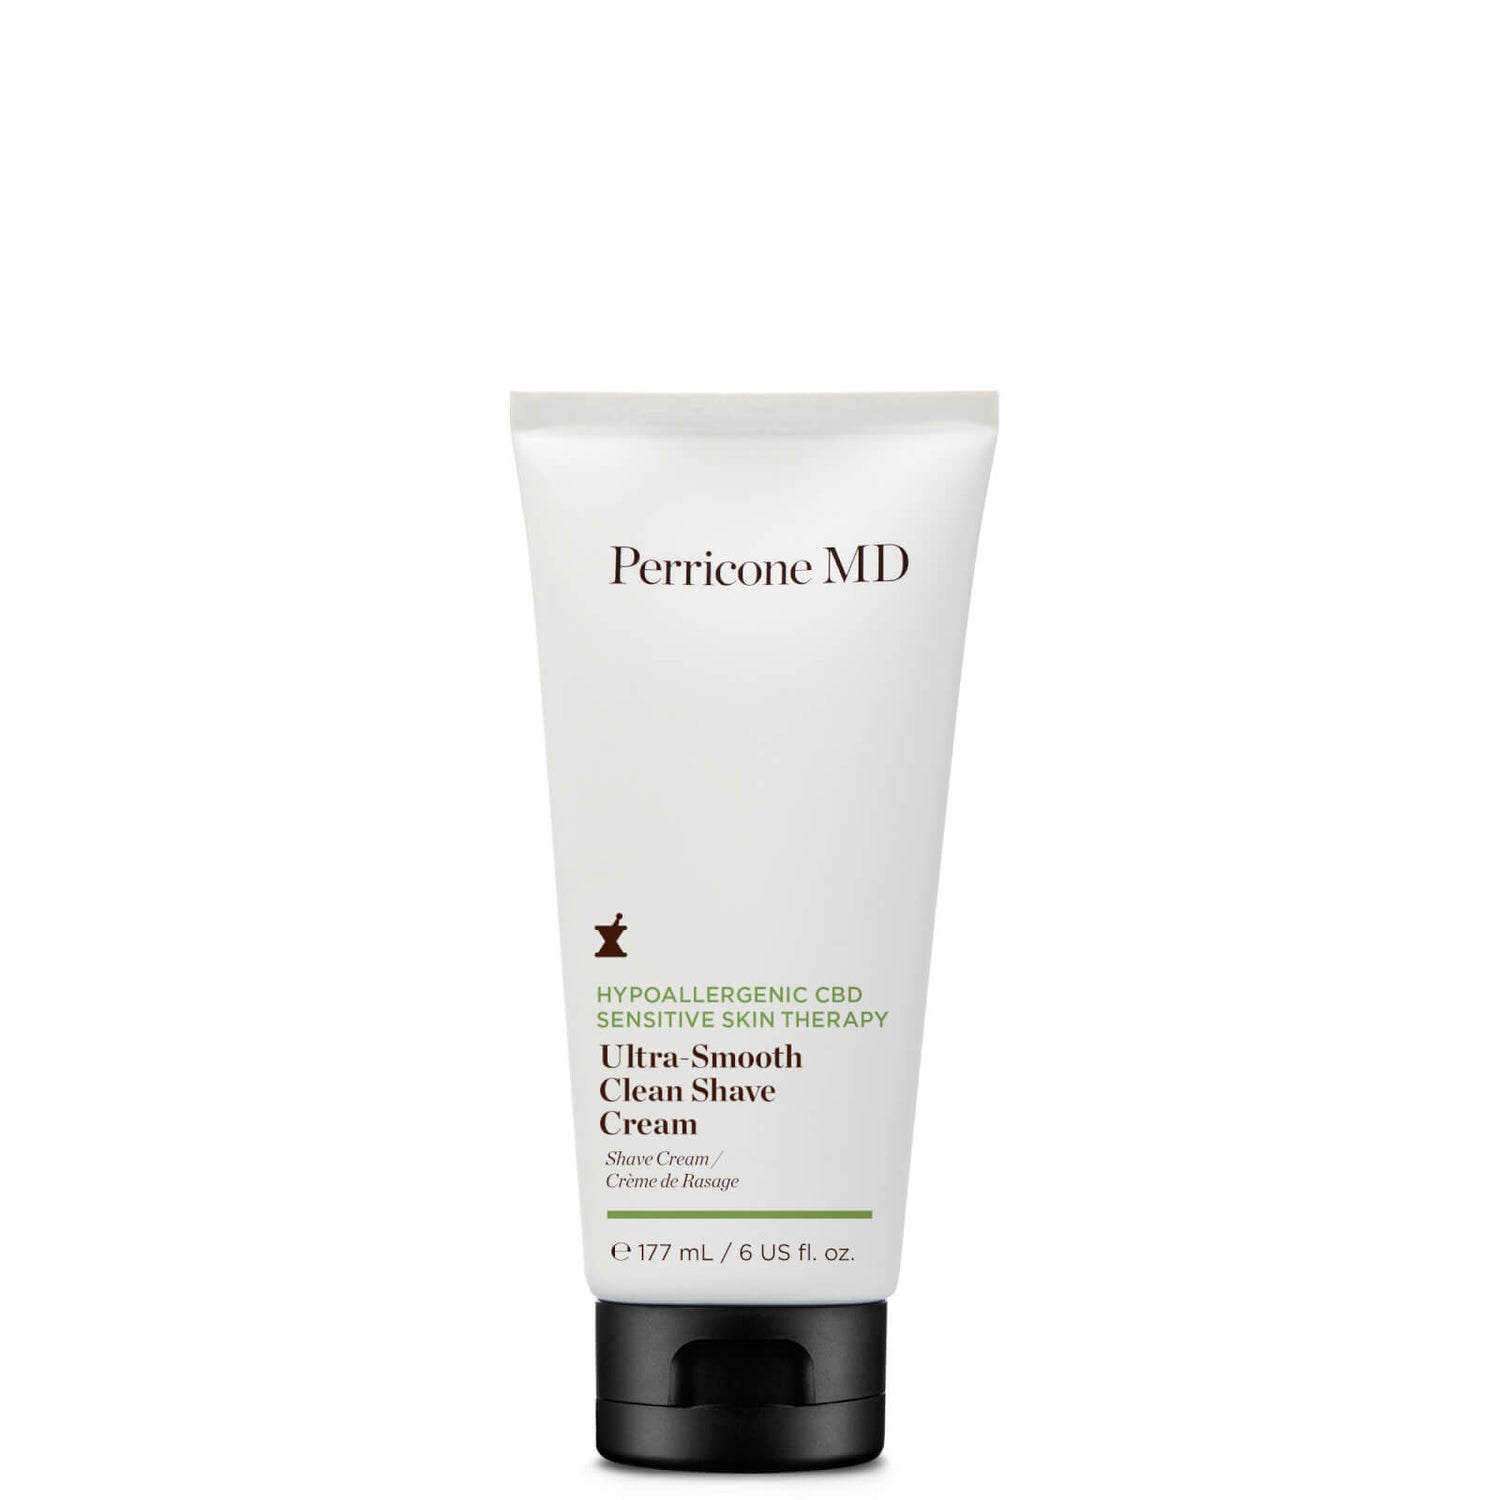 Perricone MD CBD Hypoallergenic Sensitive Skin Therapy Ultra-Smooth Clean Shave Cream 177ml